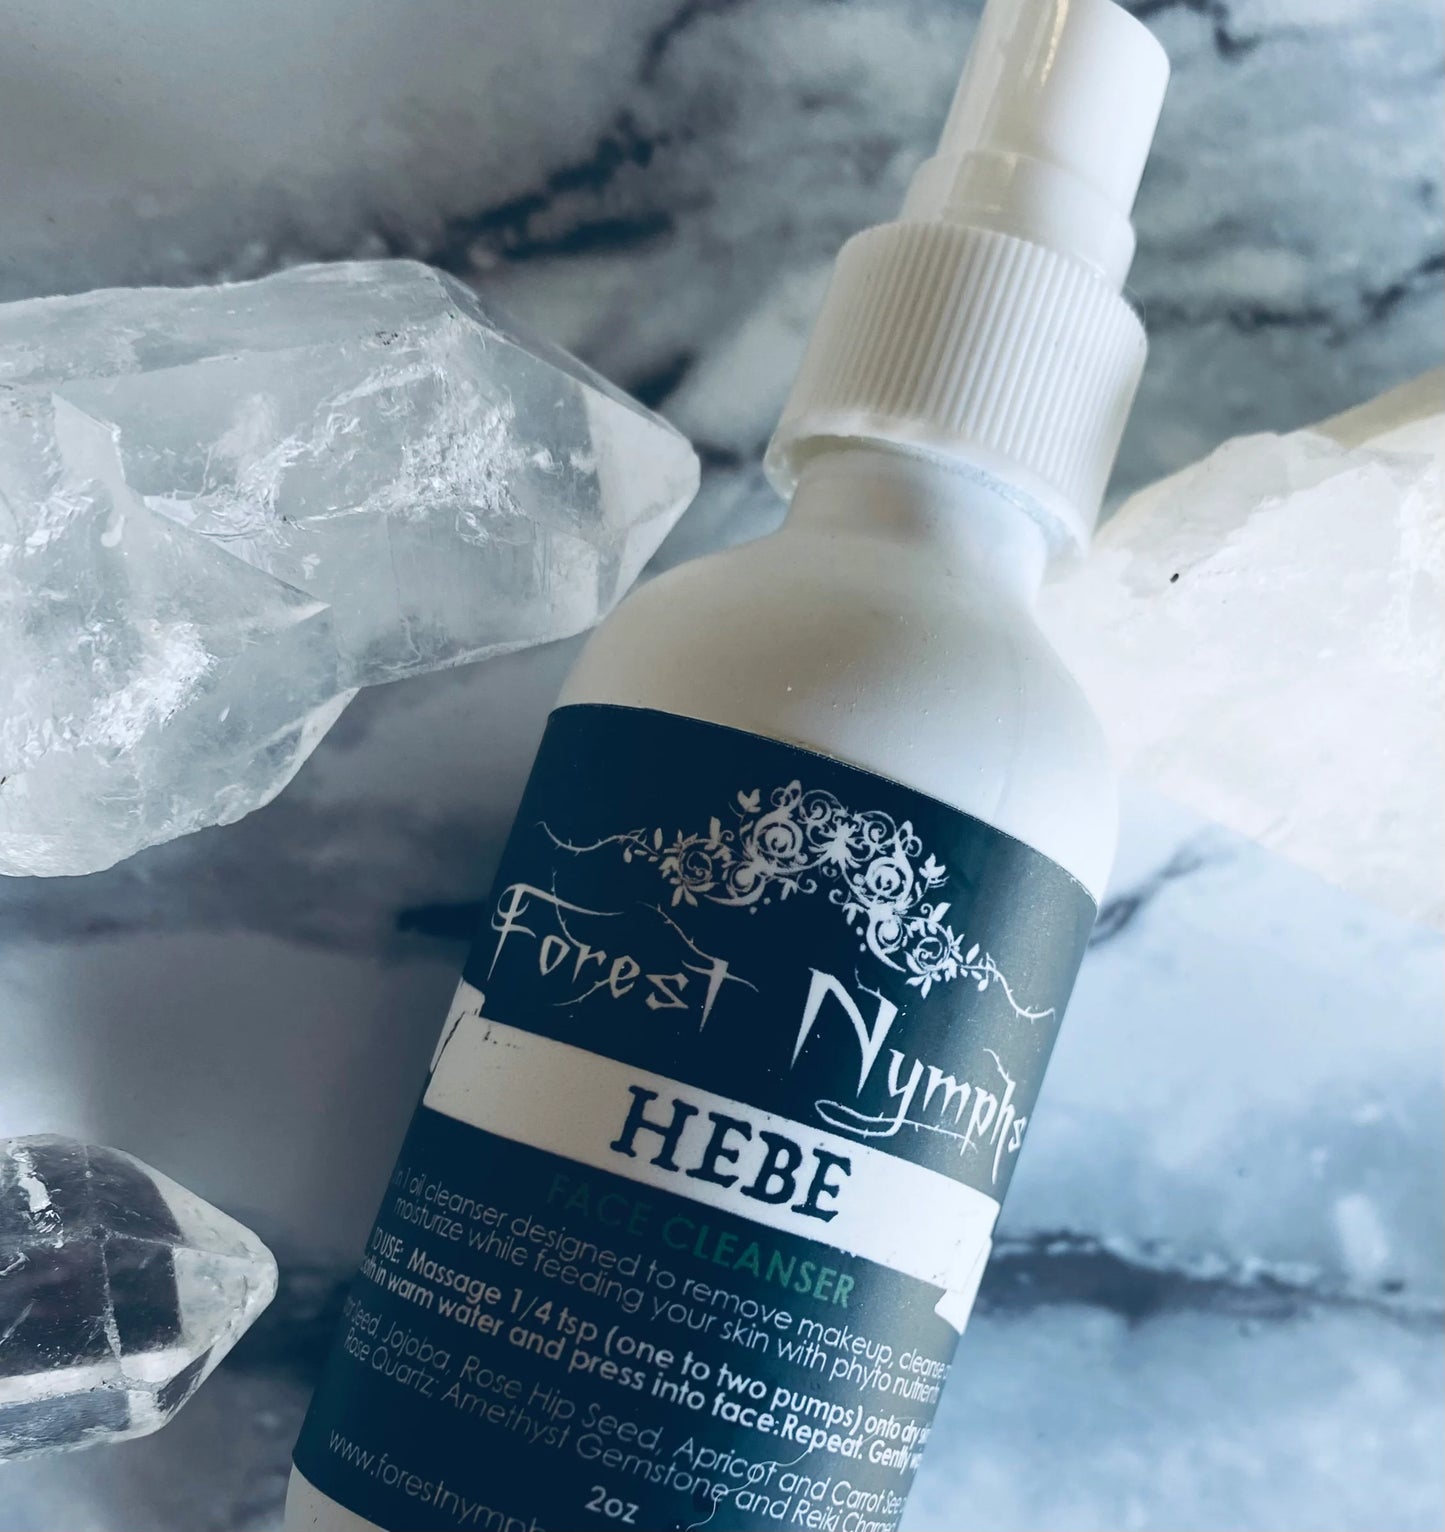 Hebe Face Organic Oil Cleanser